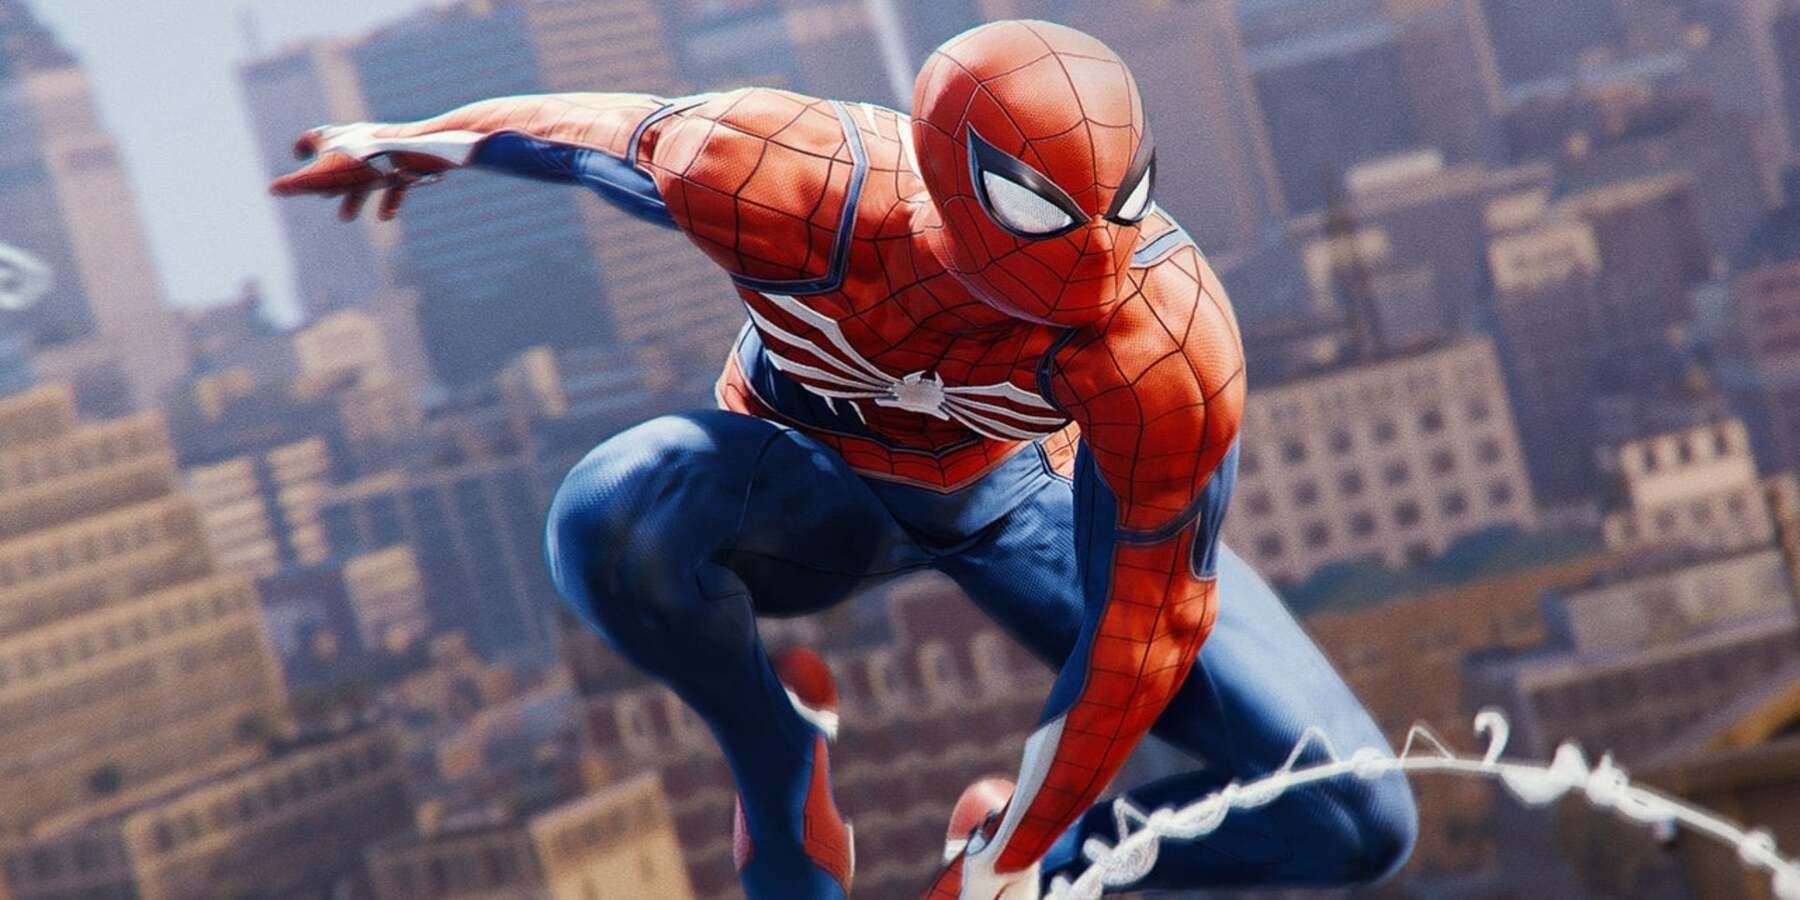 Marvel's Spider-Man spinning paid PS5 upgrade today